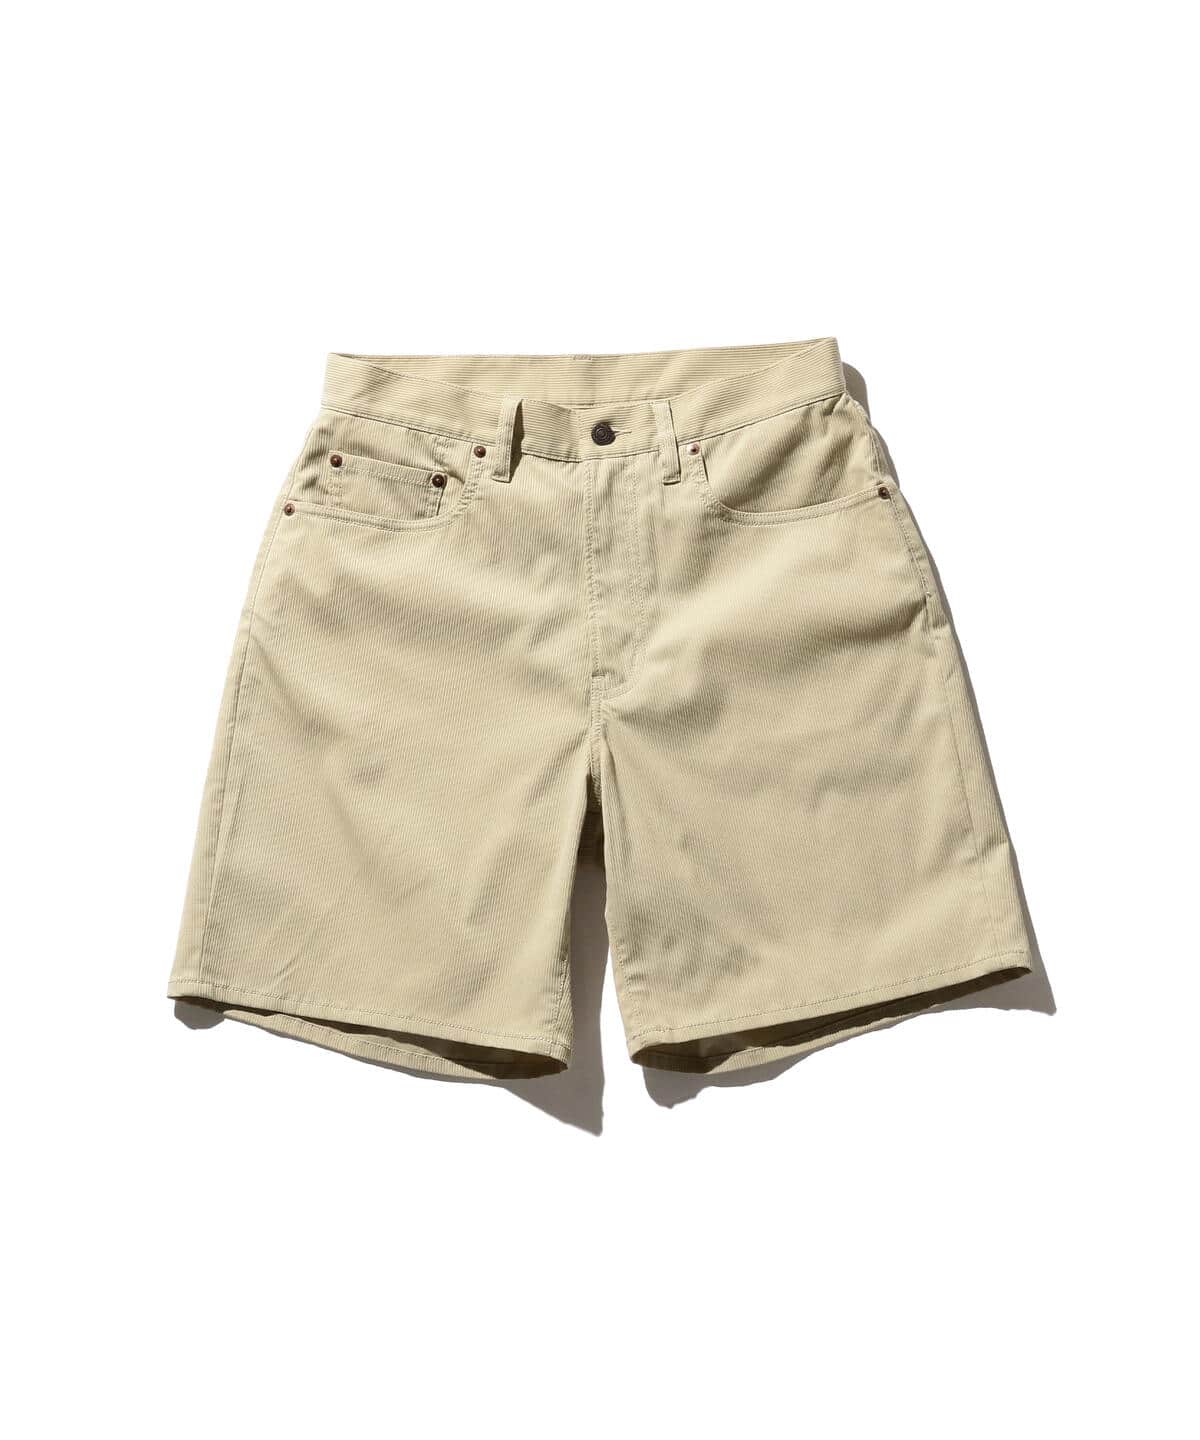 [Outlet] BEAMS PLUS / Polyester 5 pocket shorts